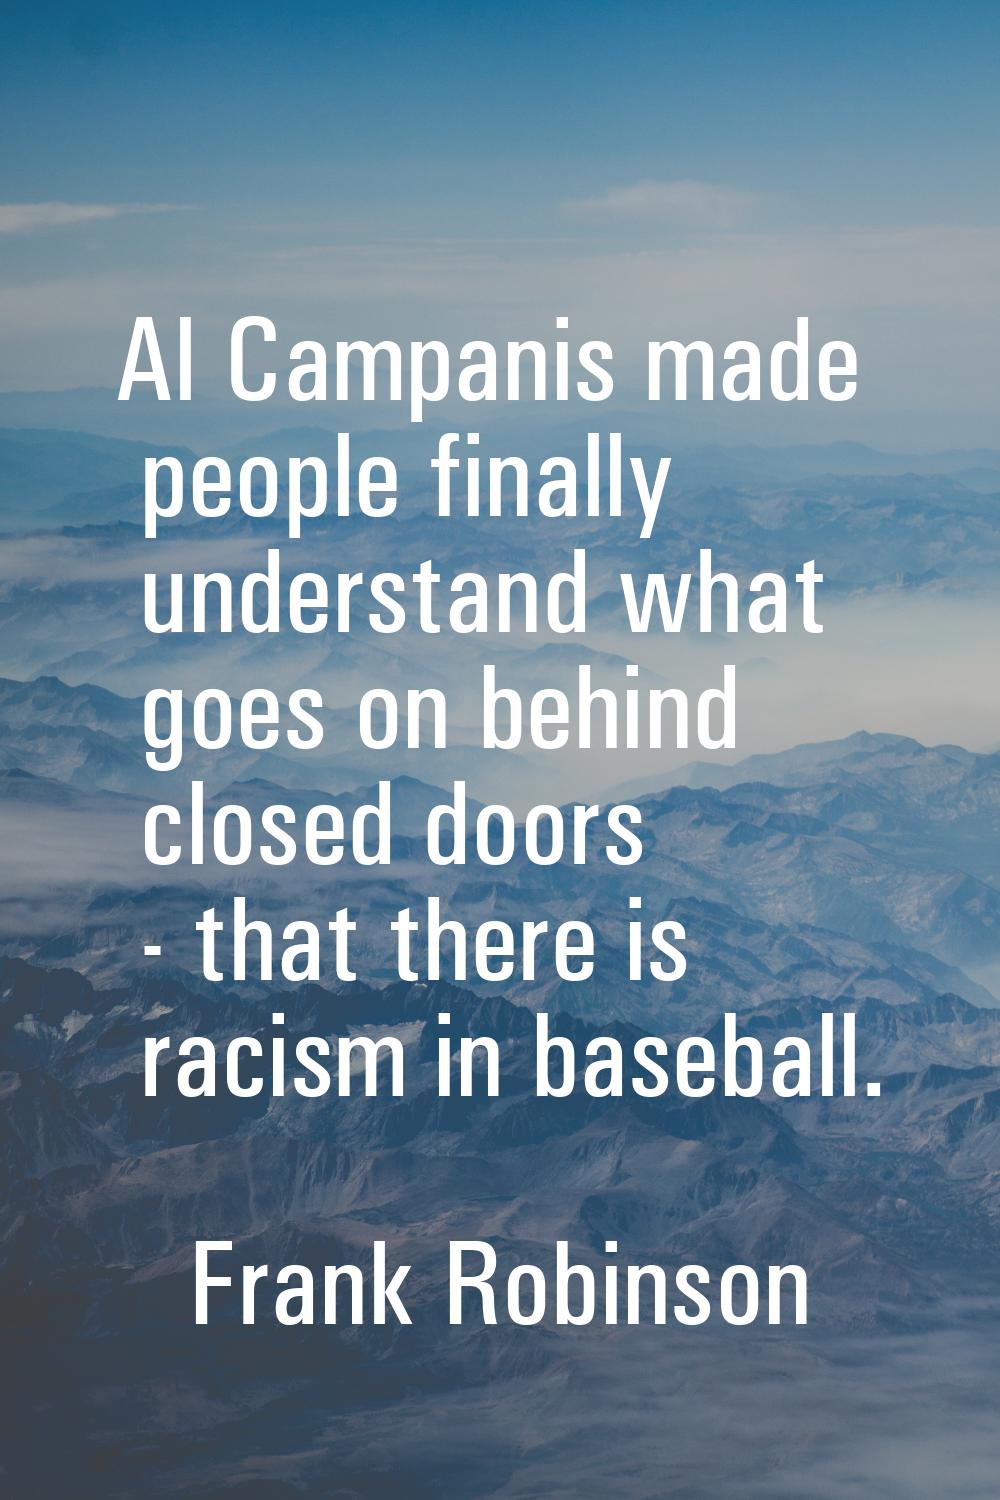 Al Campanis made people finally understand what goes on behind closed doors - that there is racism 